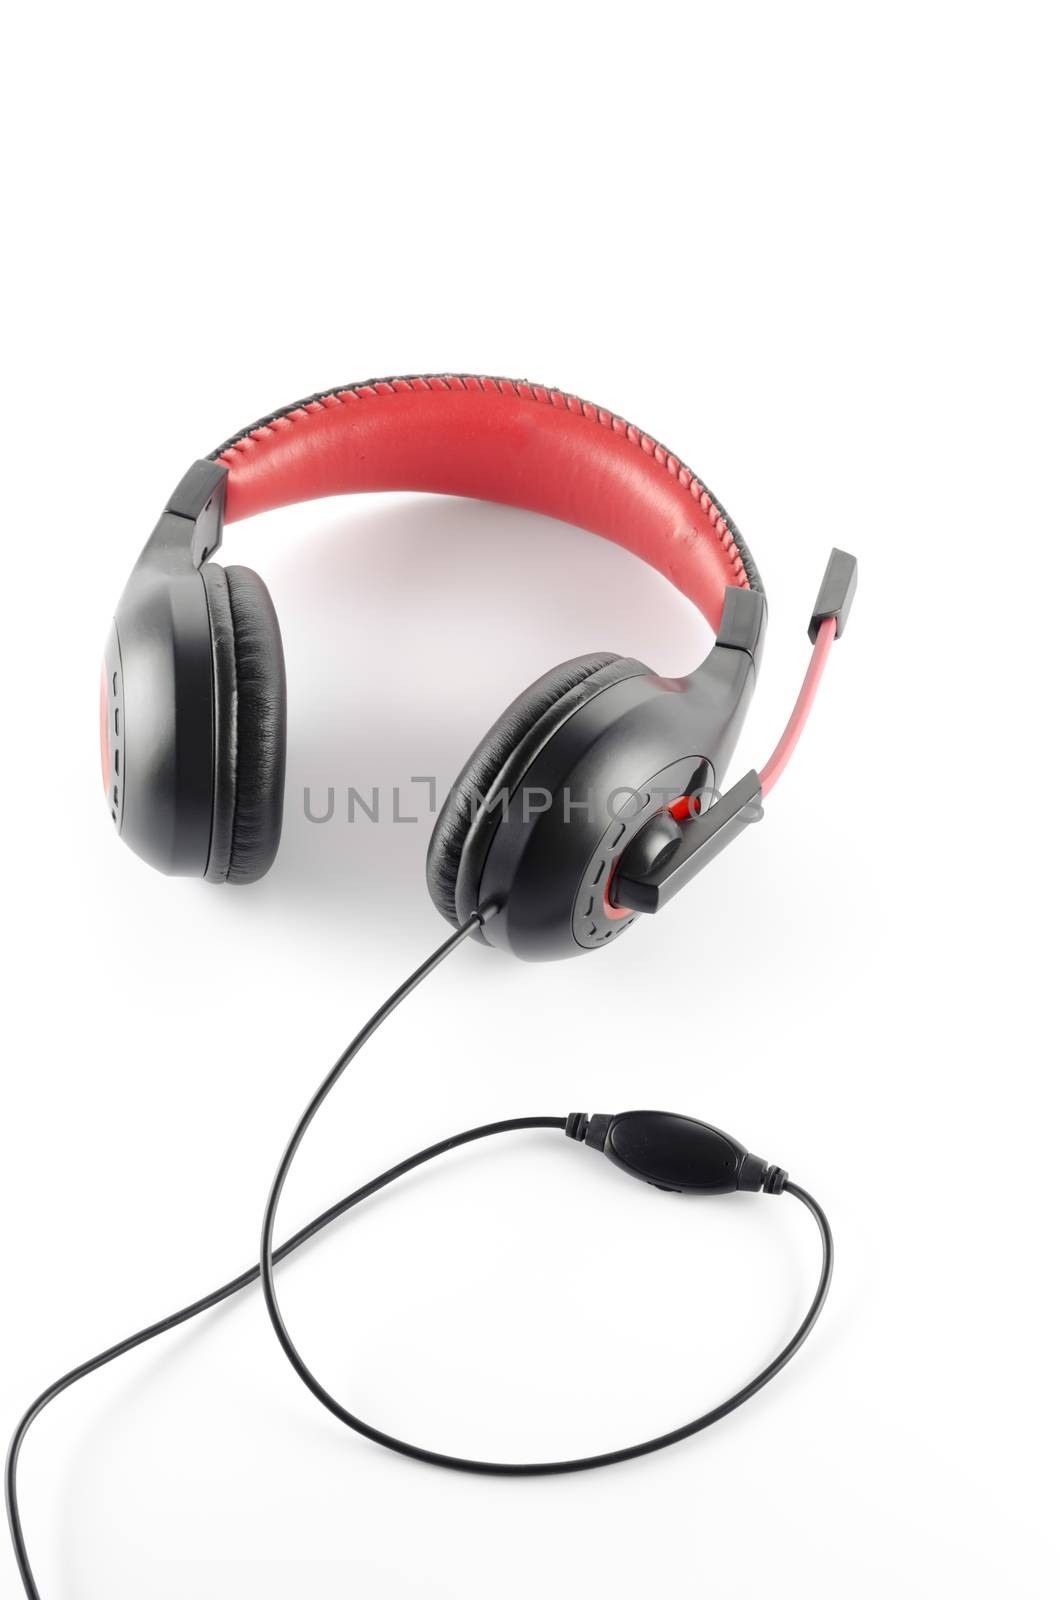 headphone on a white background